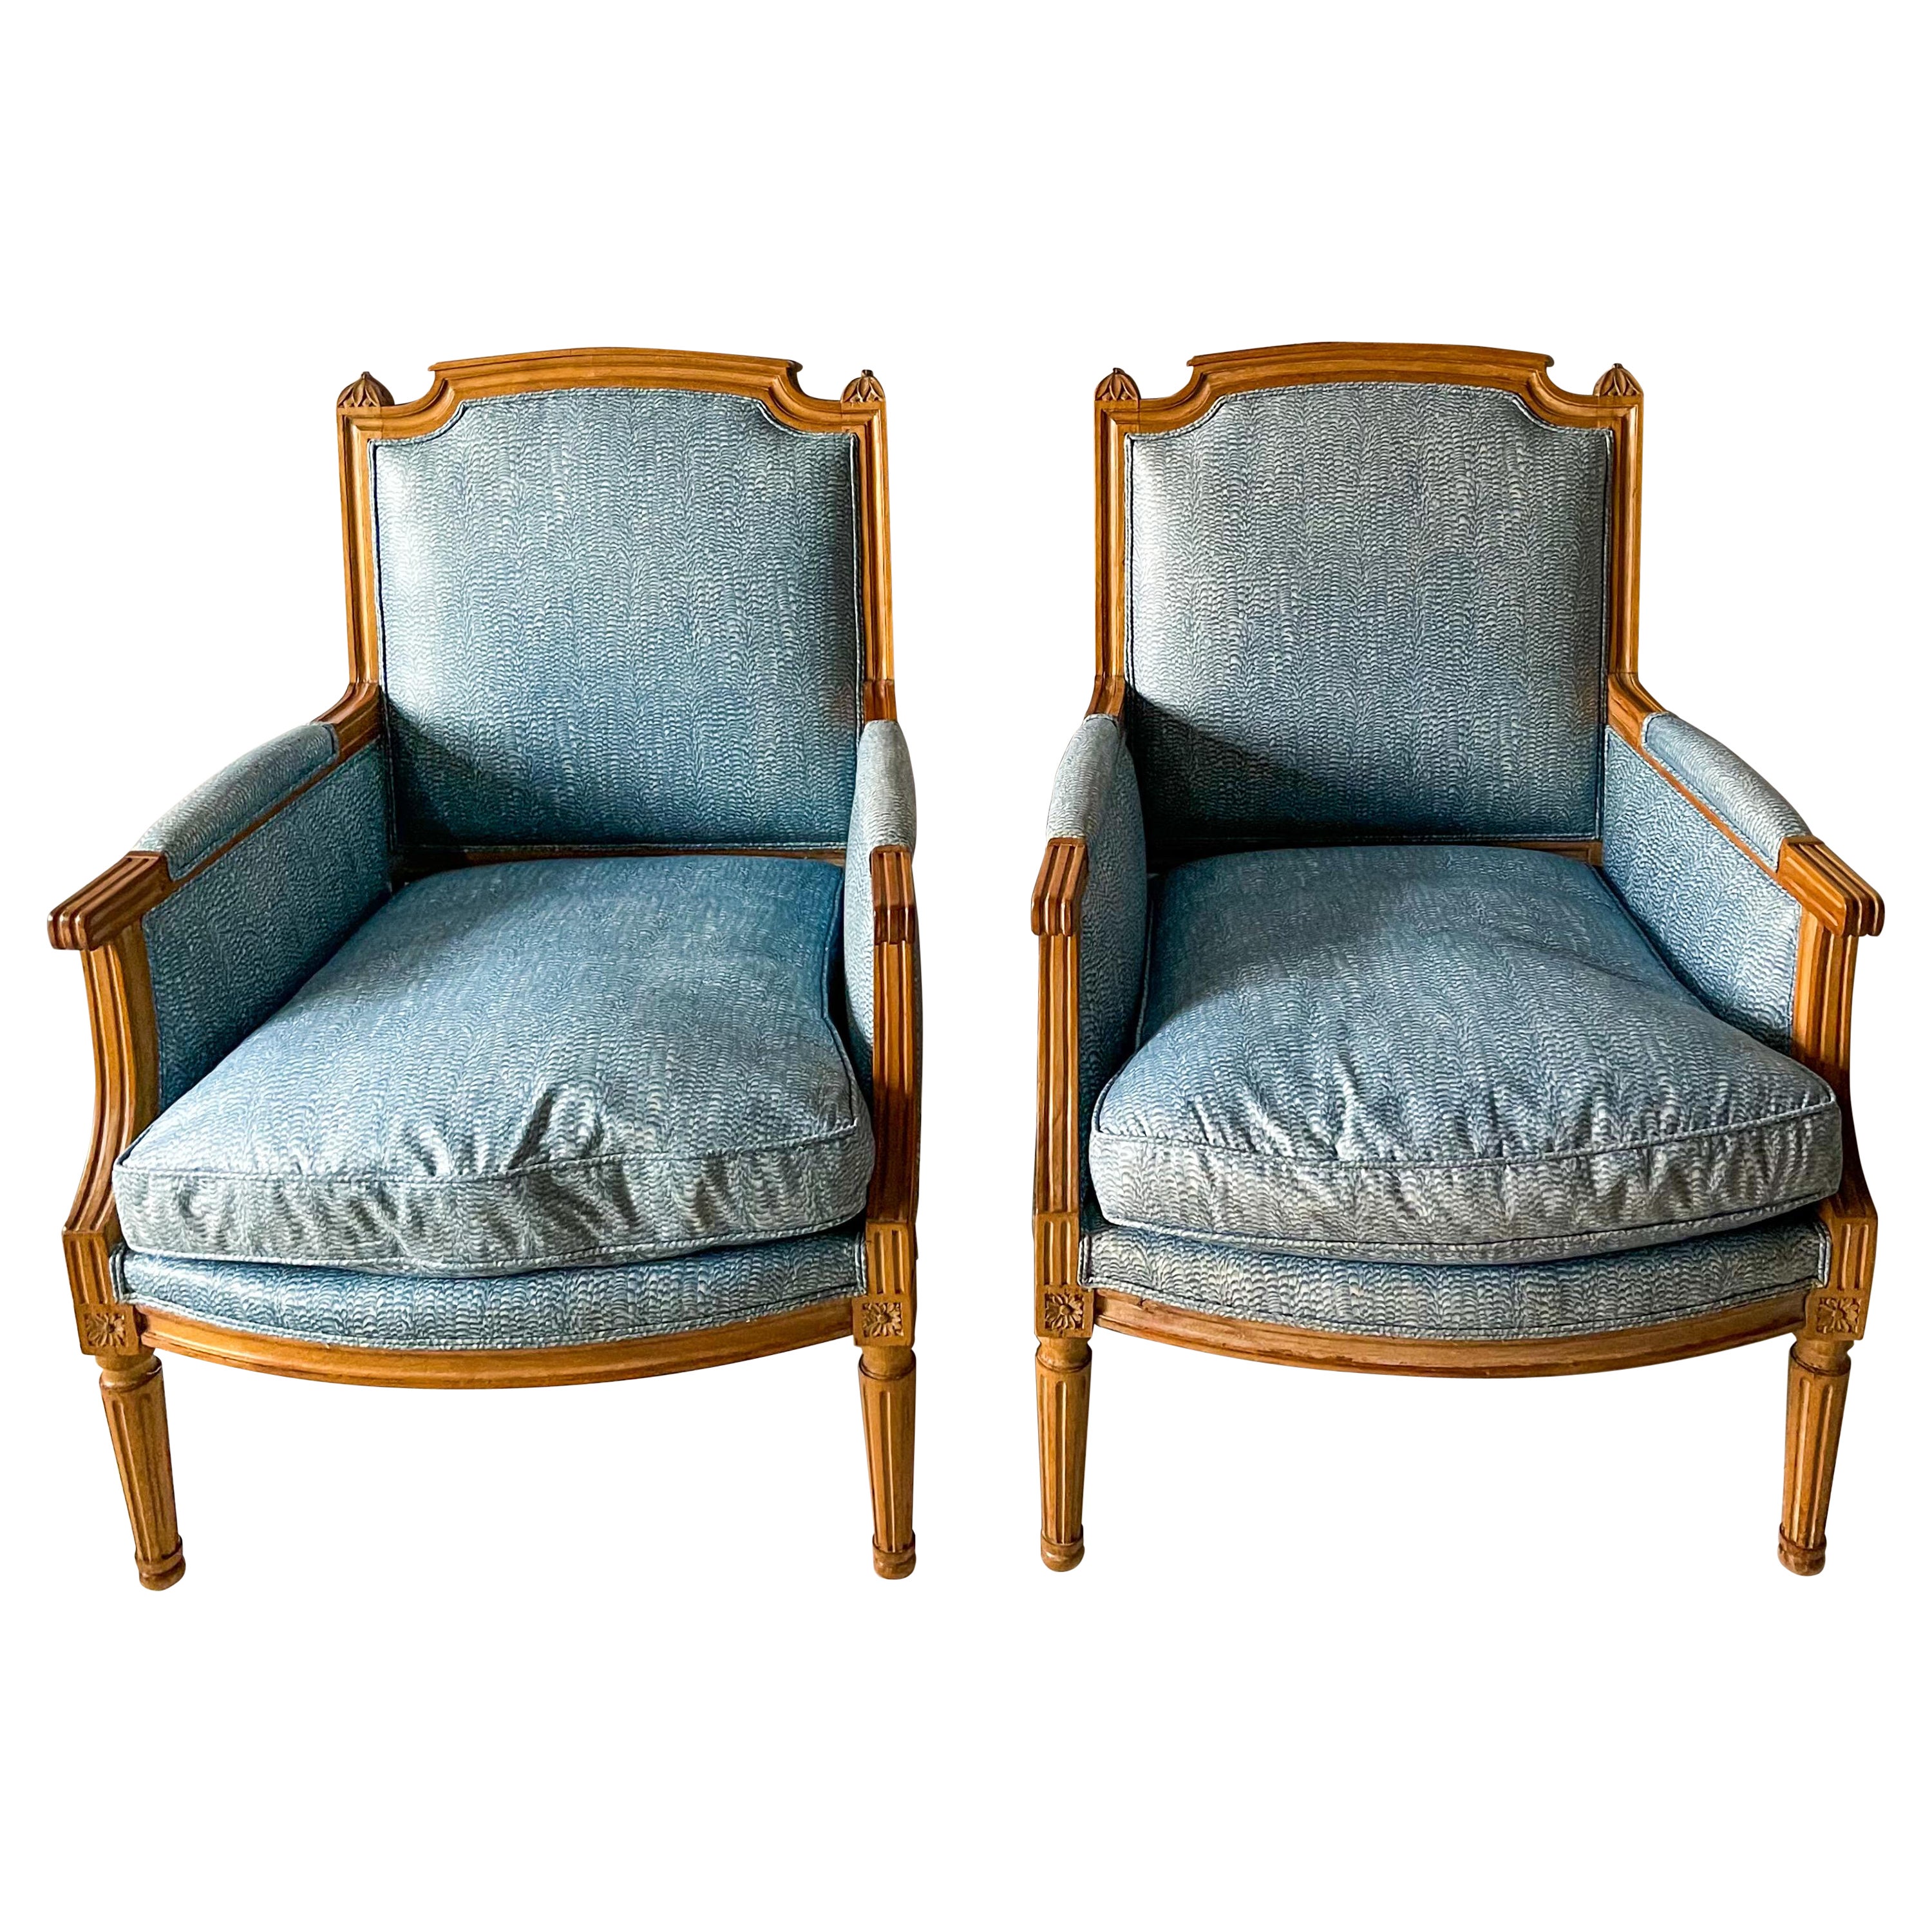 French Directoire Style Cerused Oak Club Chairs in Blue Chintz, Pair